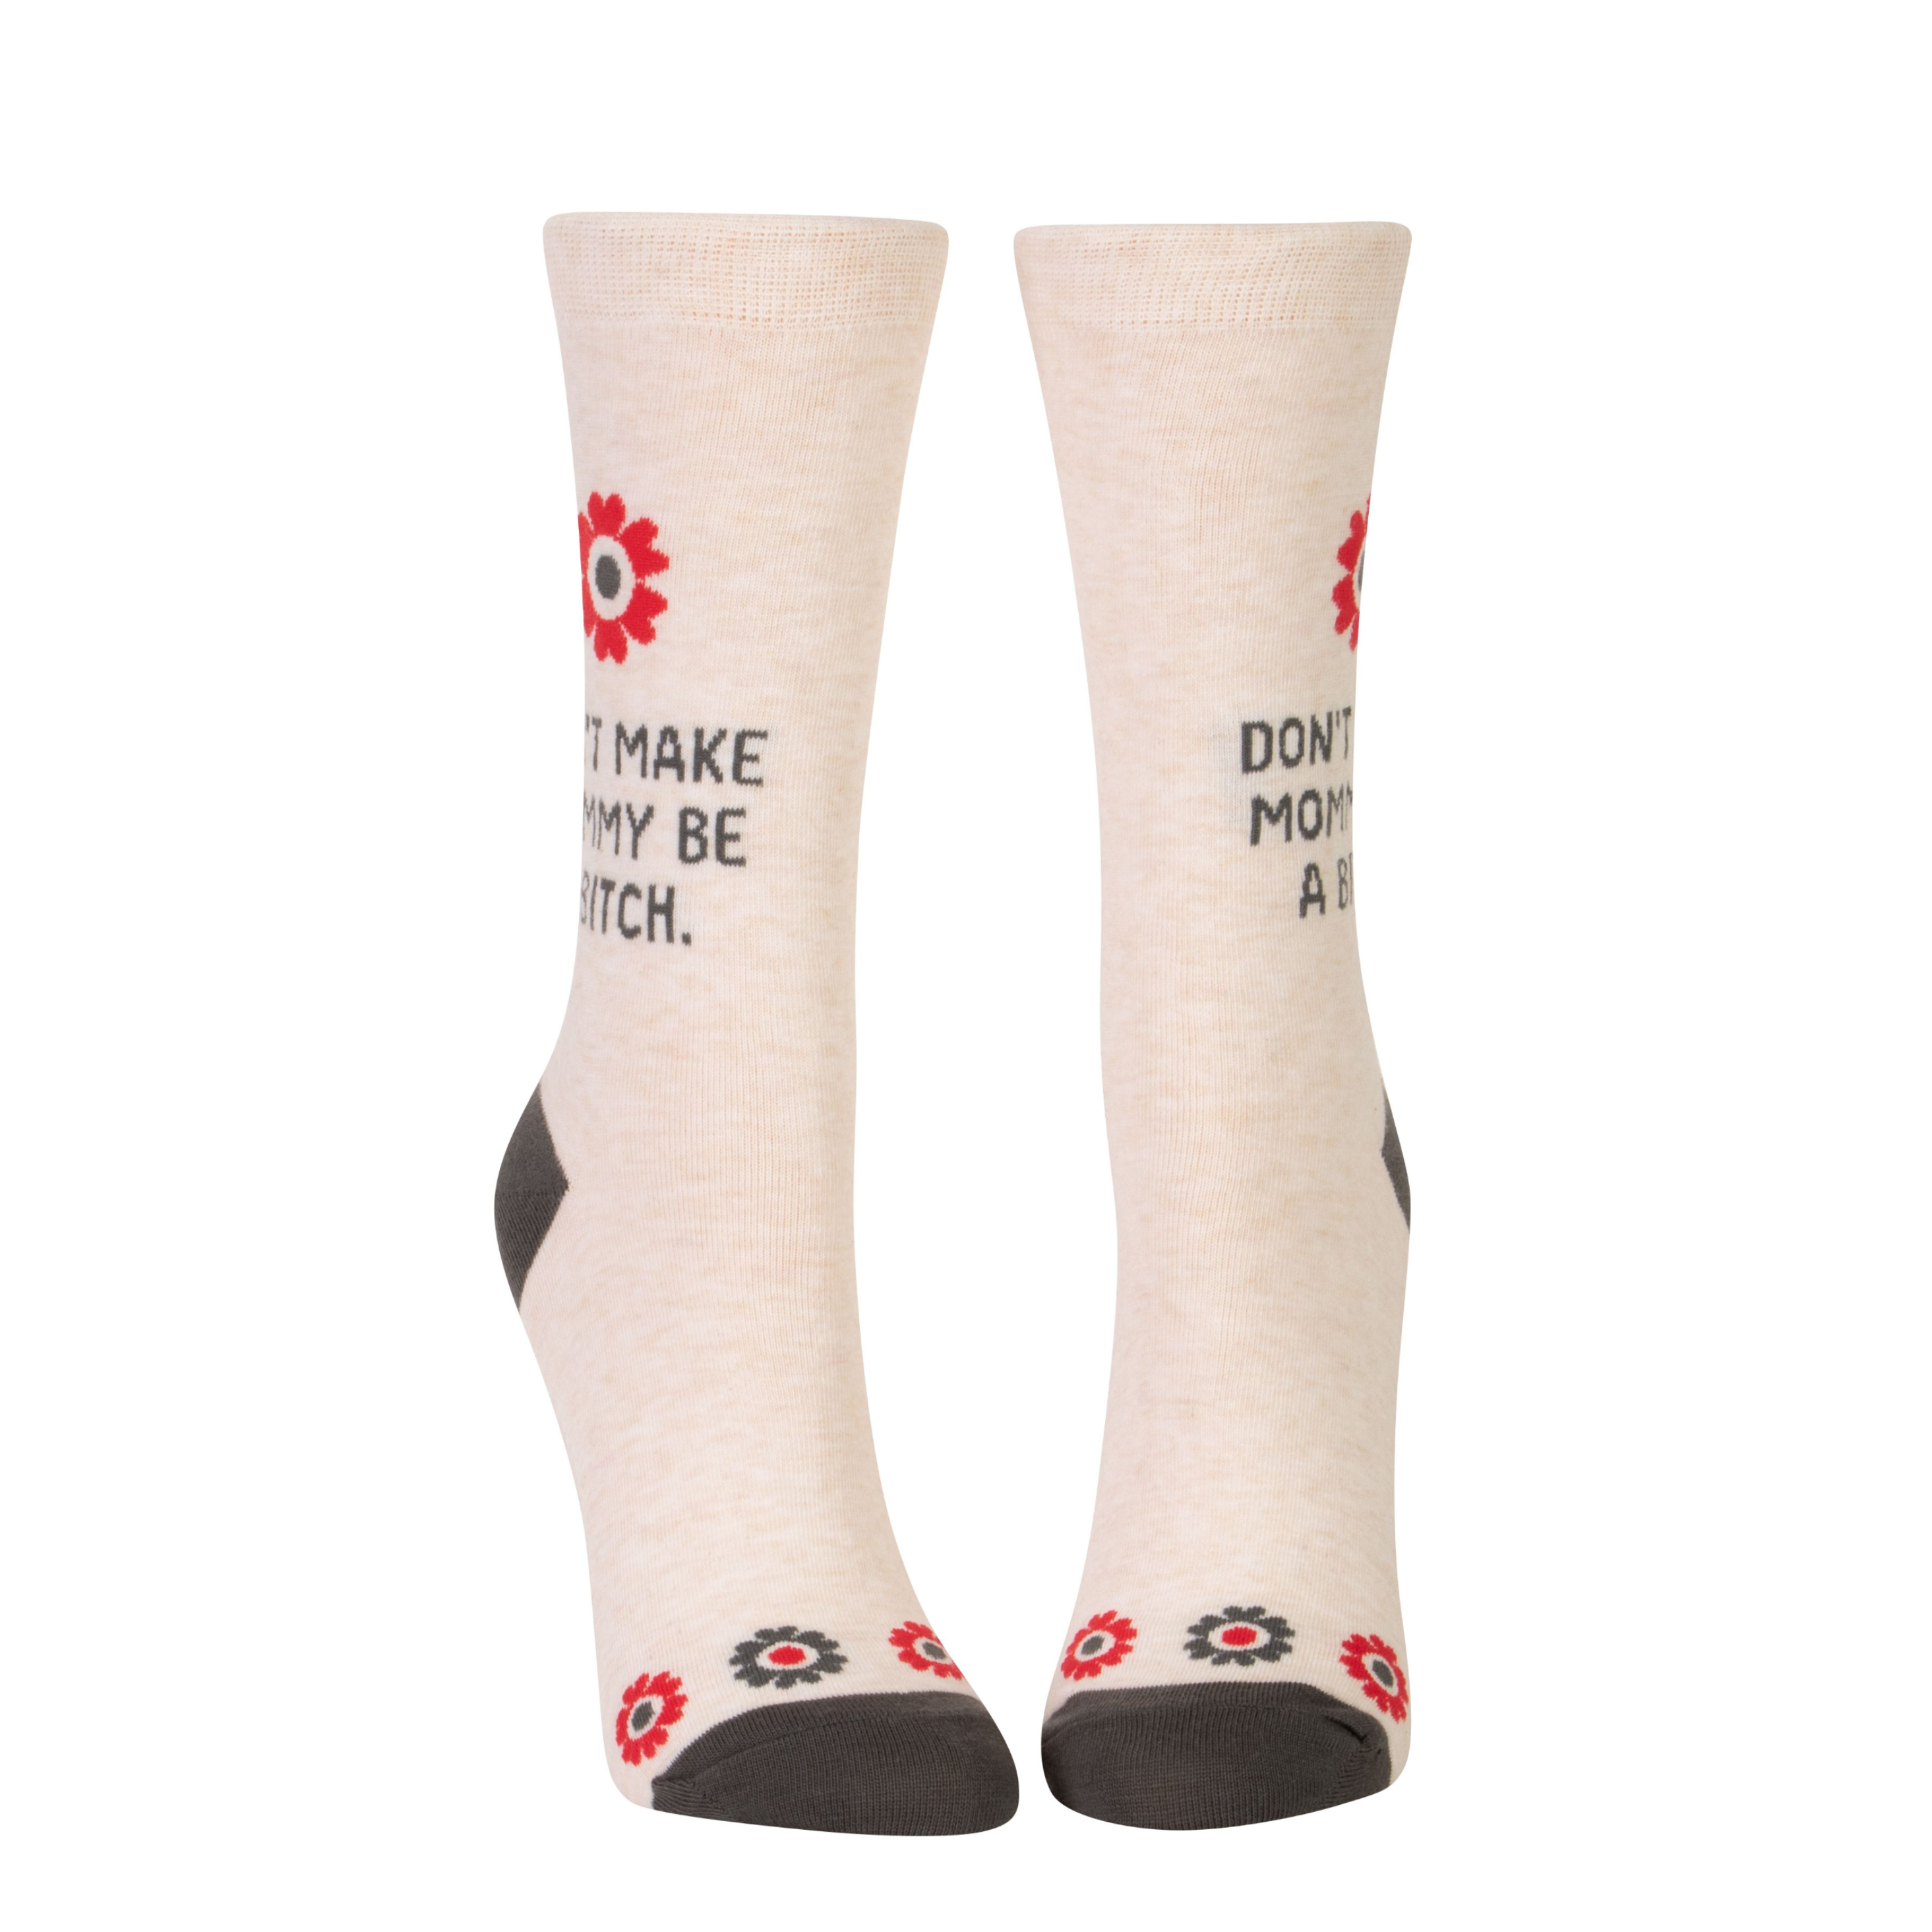 cream socks with brown toe and heel red flower on ankle and below it says don't make mommy be a bitch